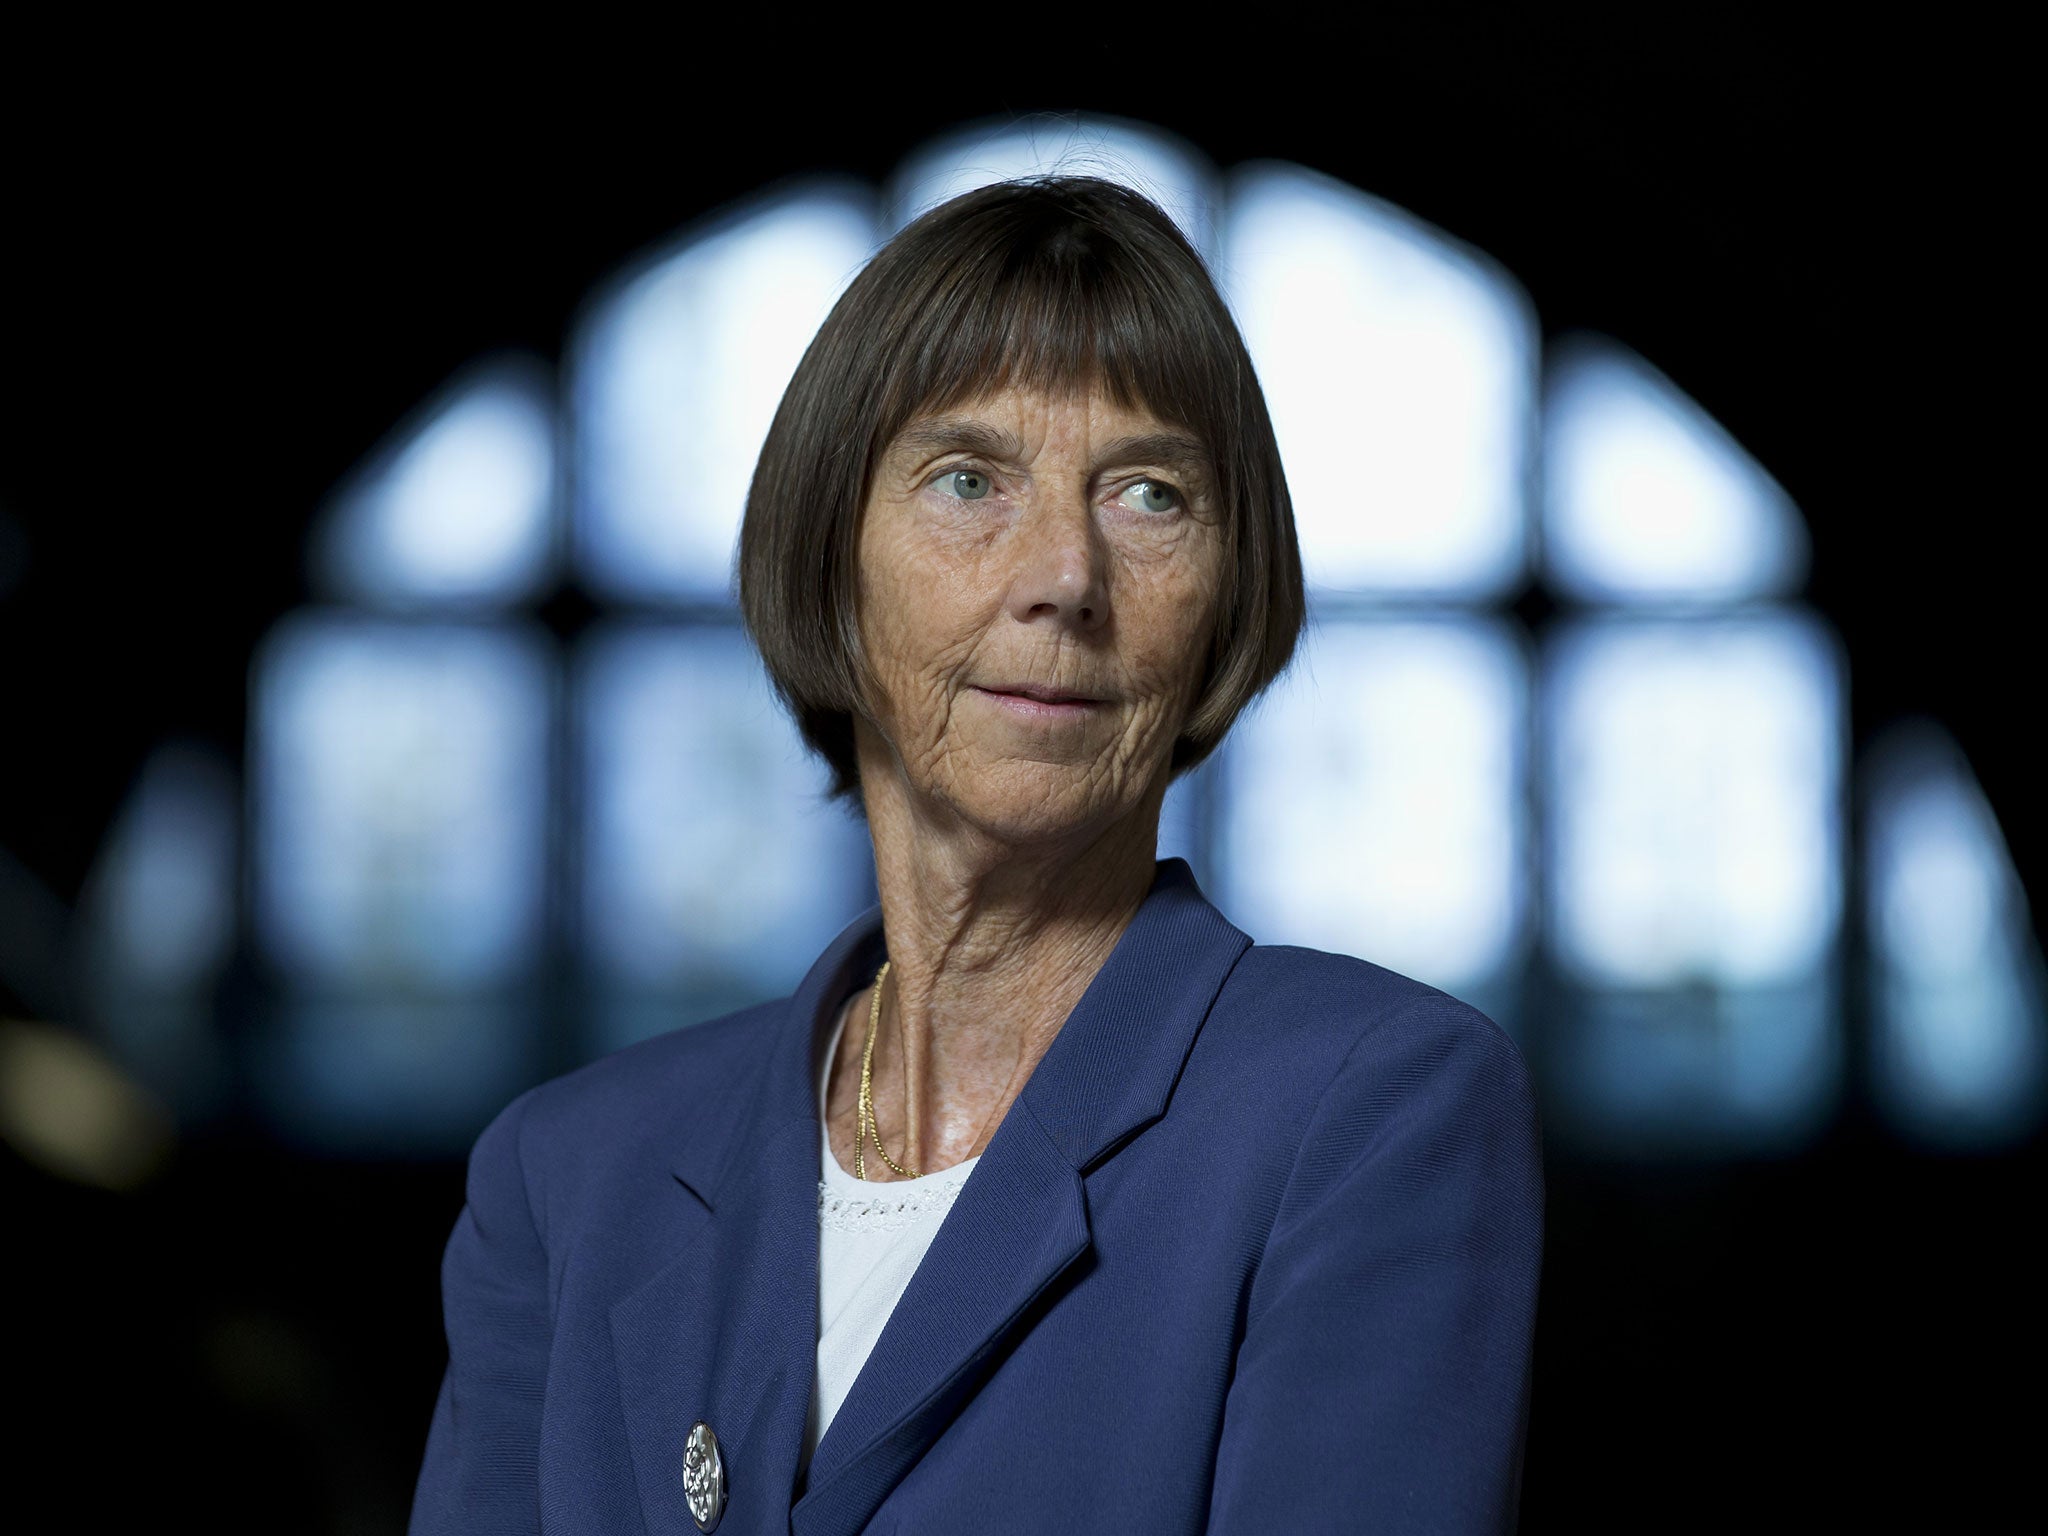 Dame Sue Ion says the turning point was when a teacher suggested she read material sciences